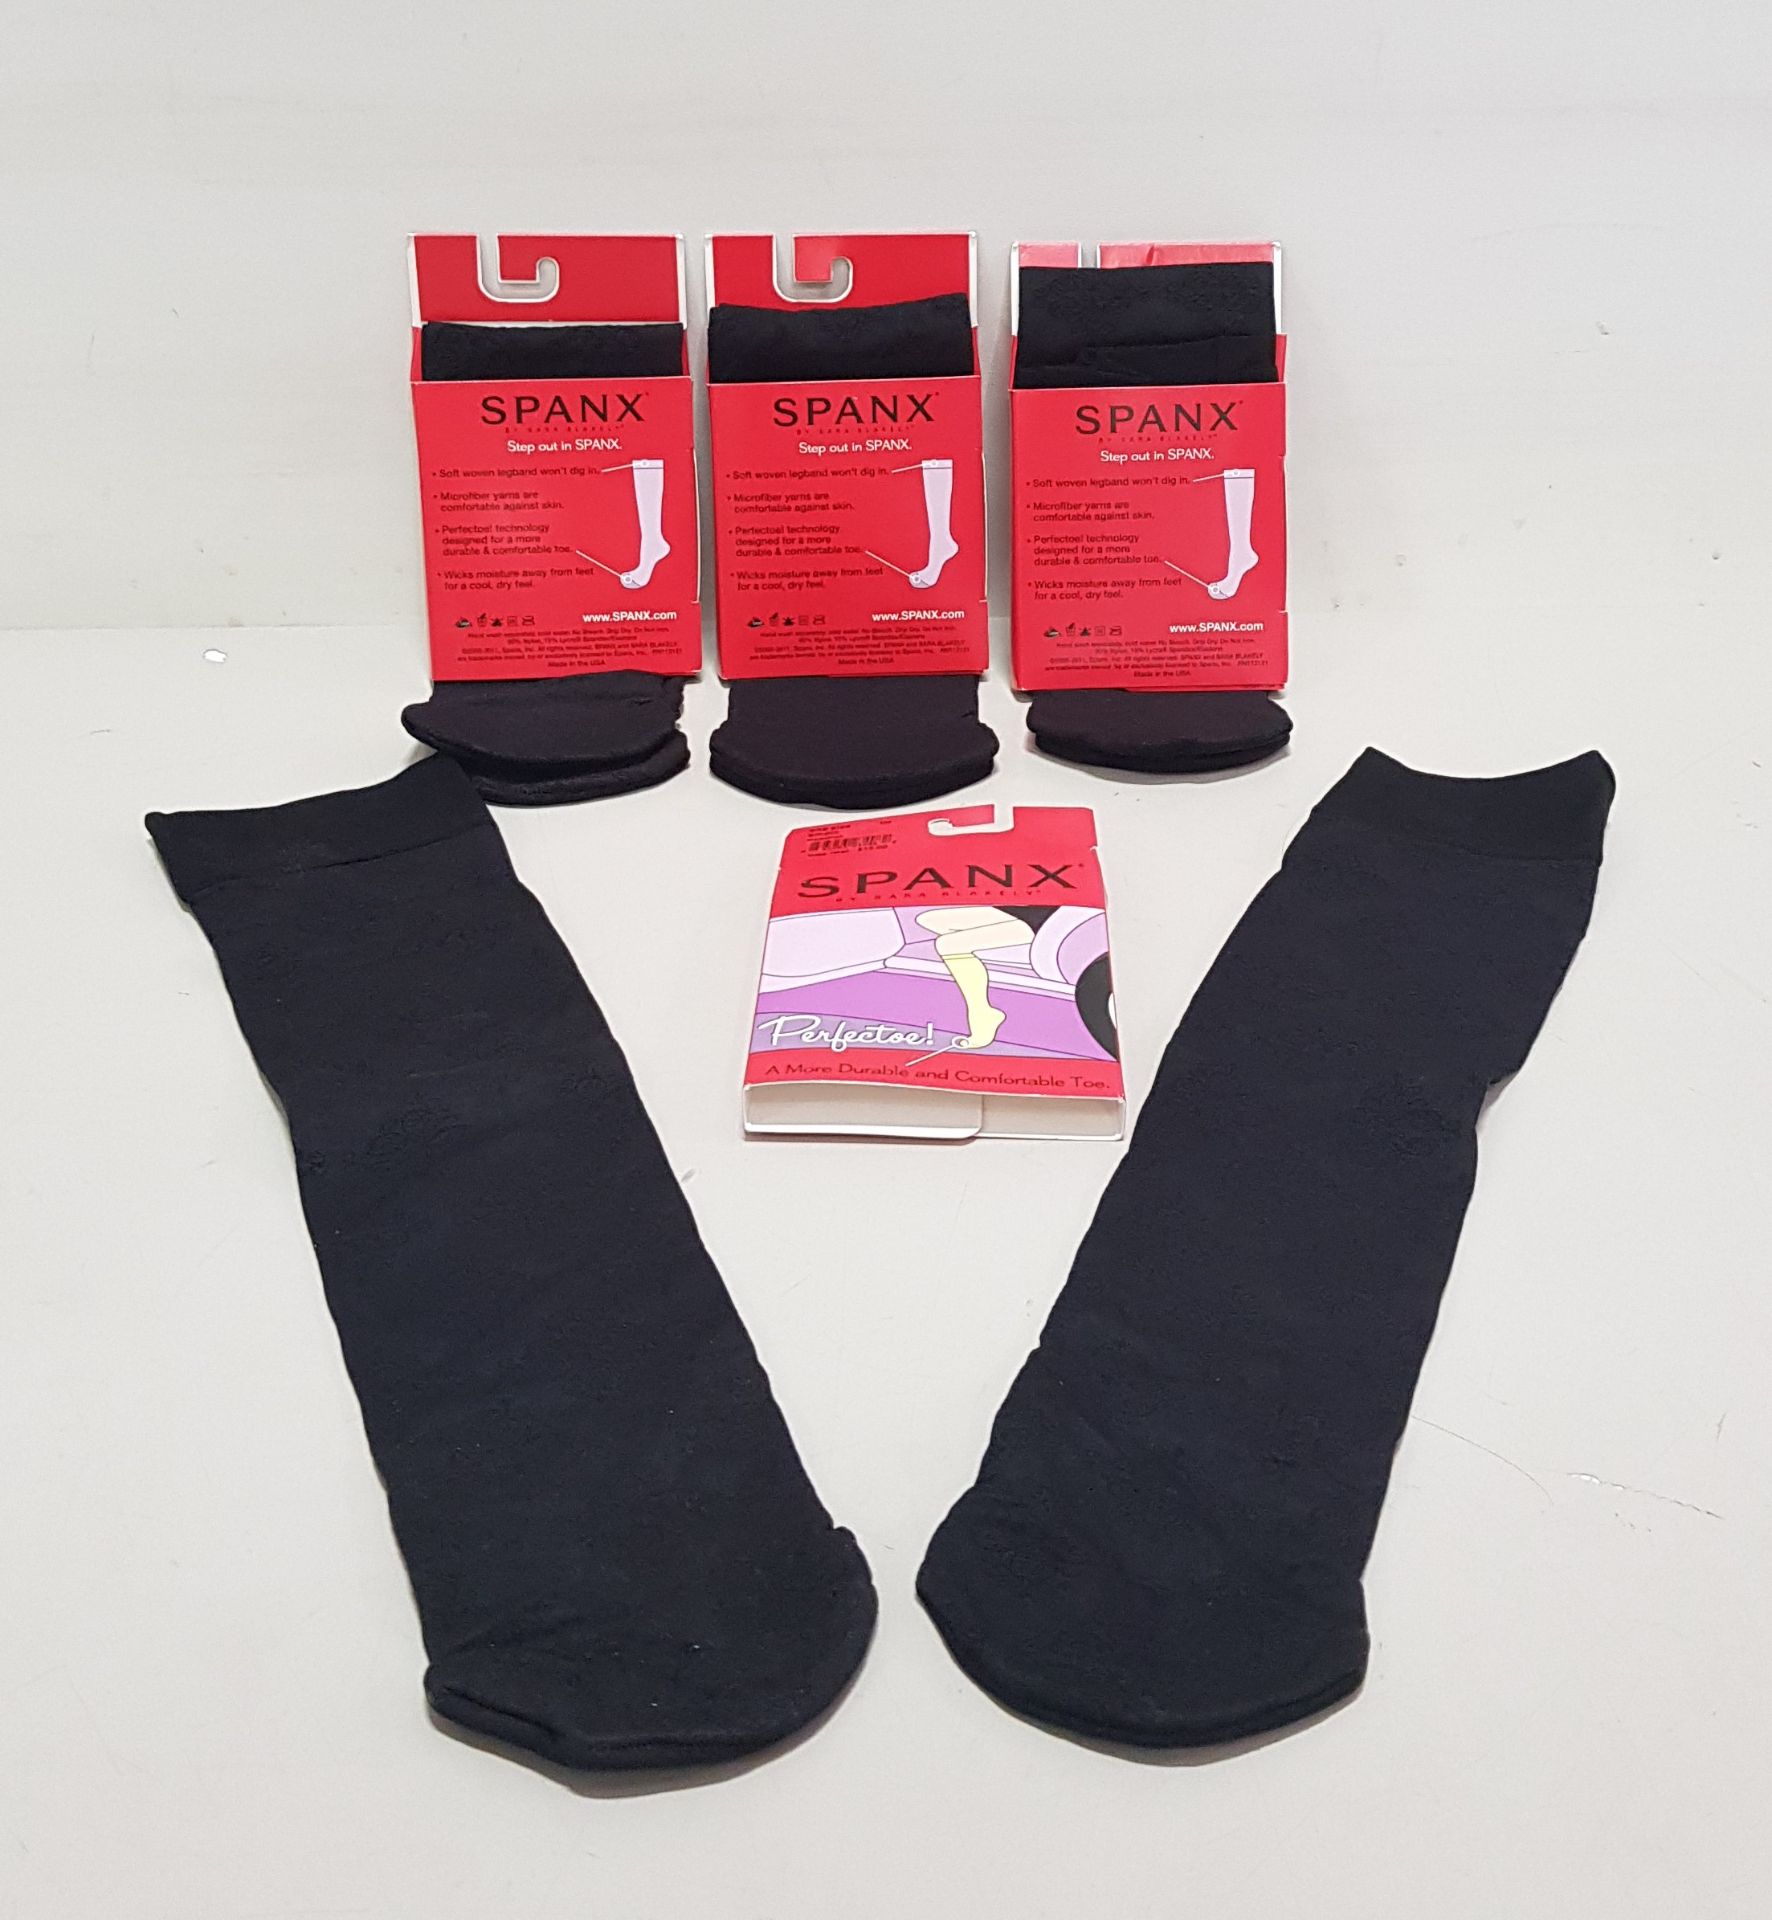 60 X BRAND NEW SPANX MEDALLION HALF STOCKINGS IN ONE SIZE RRP $ 15.00 ( TOTAL RRP $ 900.00 )